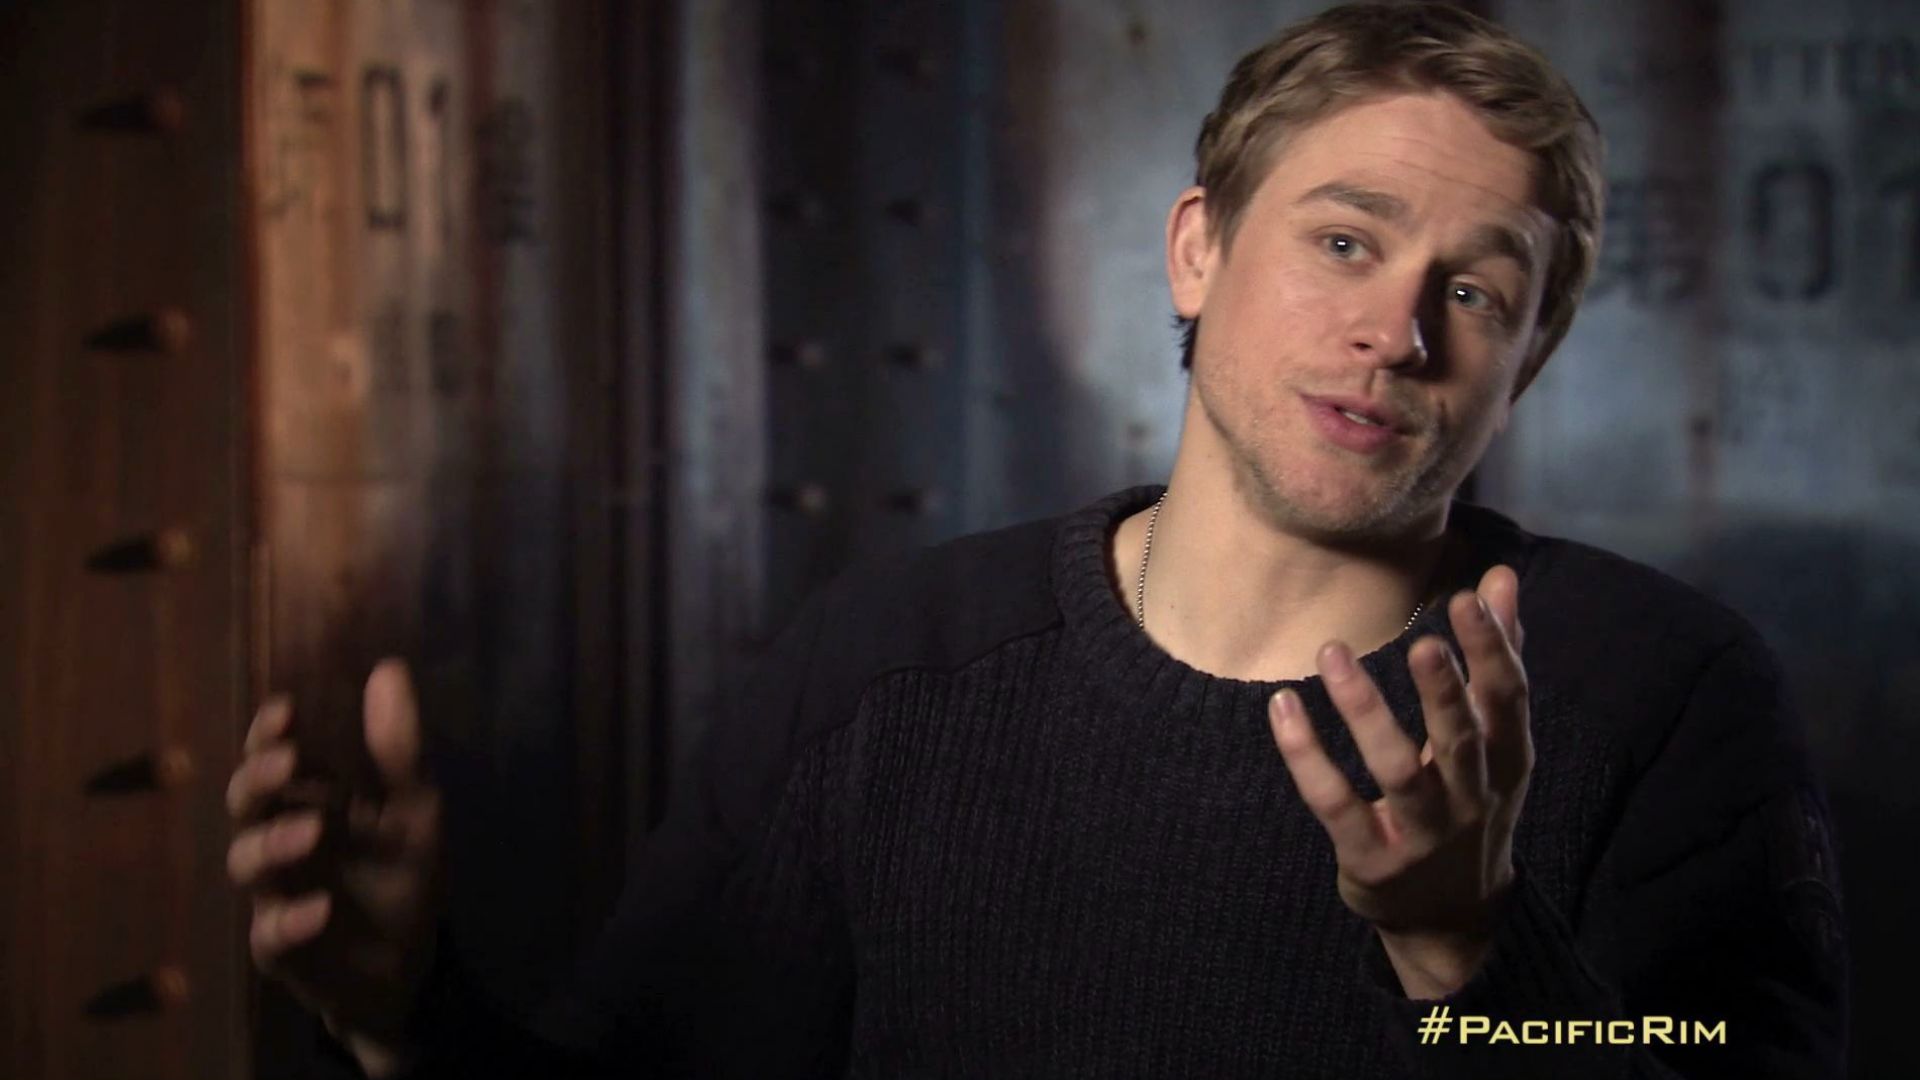 Charlie Hunnam and Idris Elba talk about the making of Pacific Rim